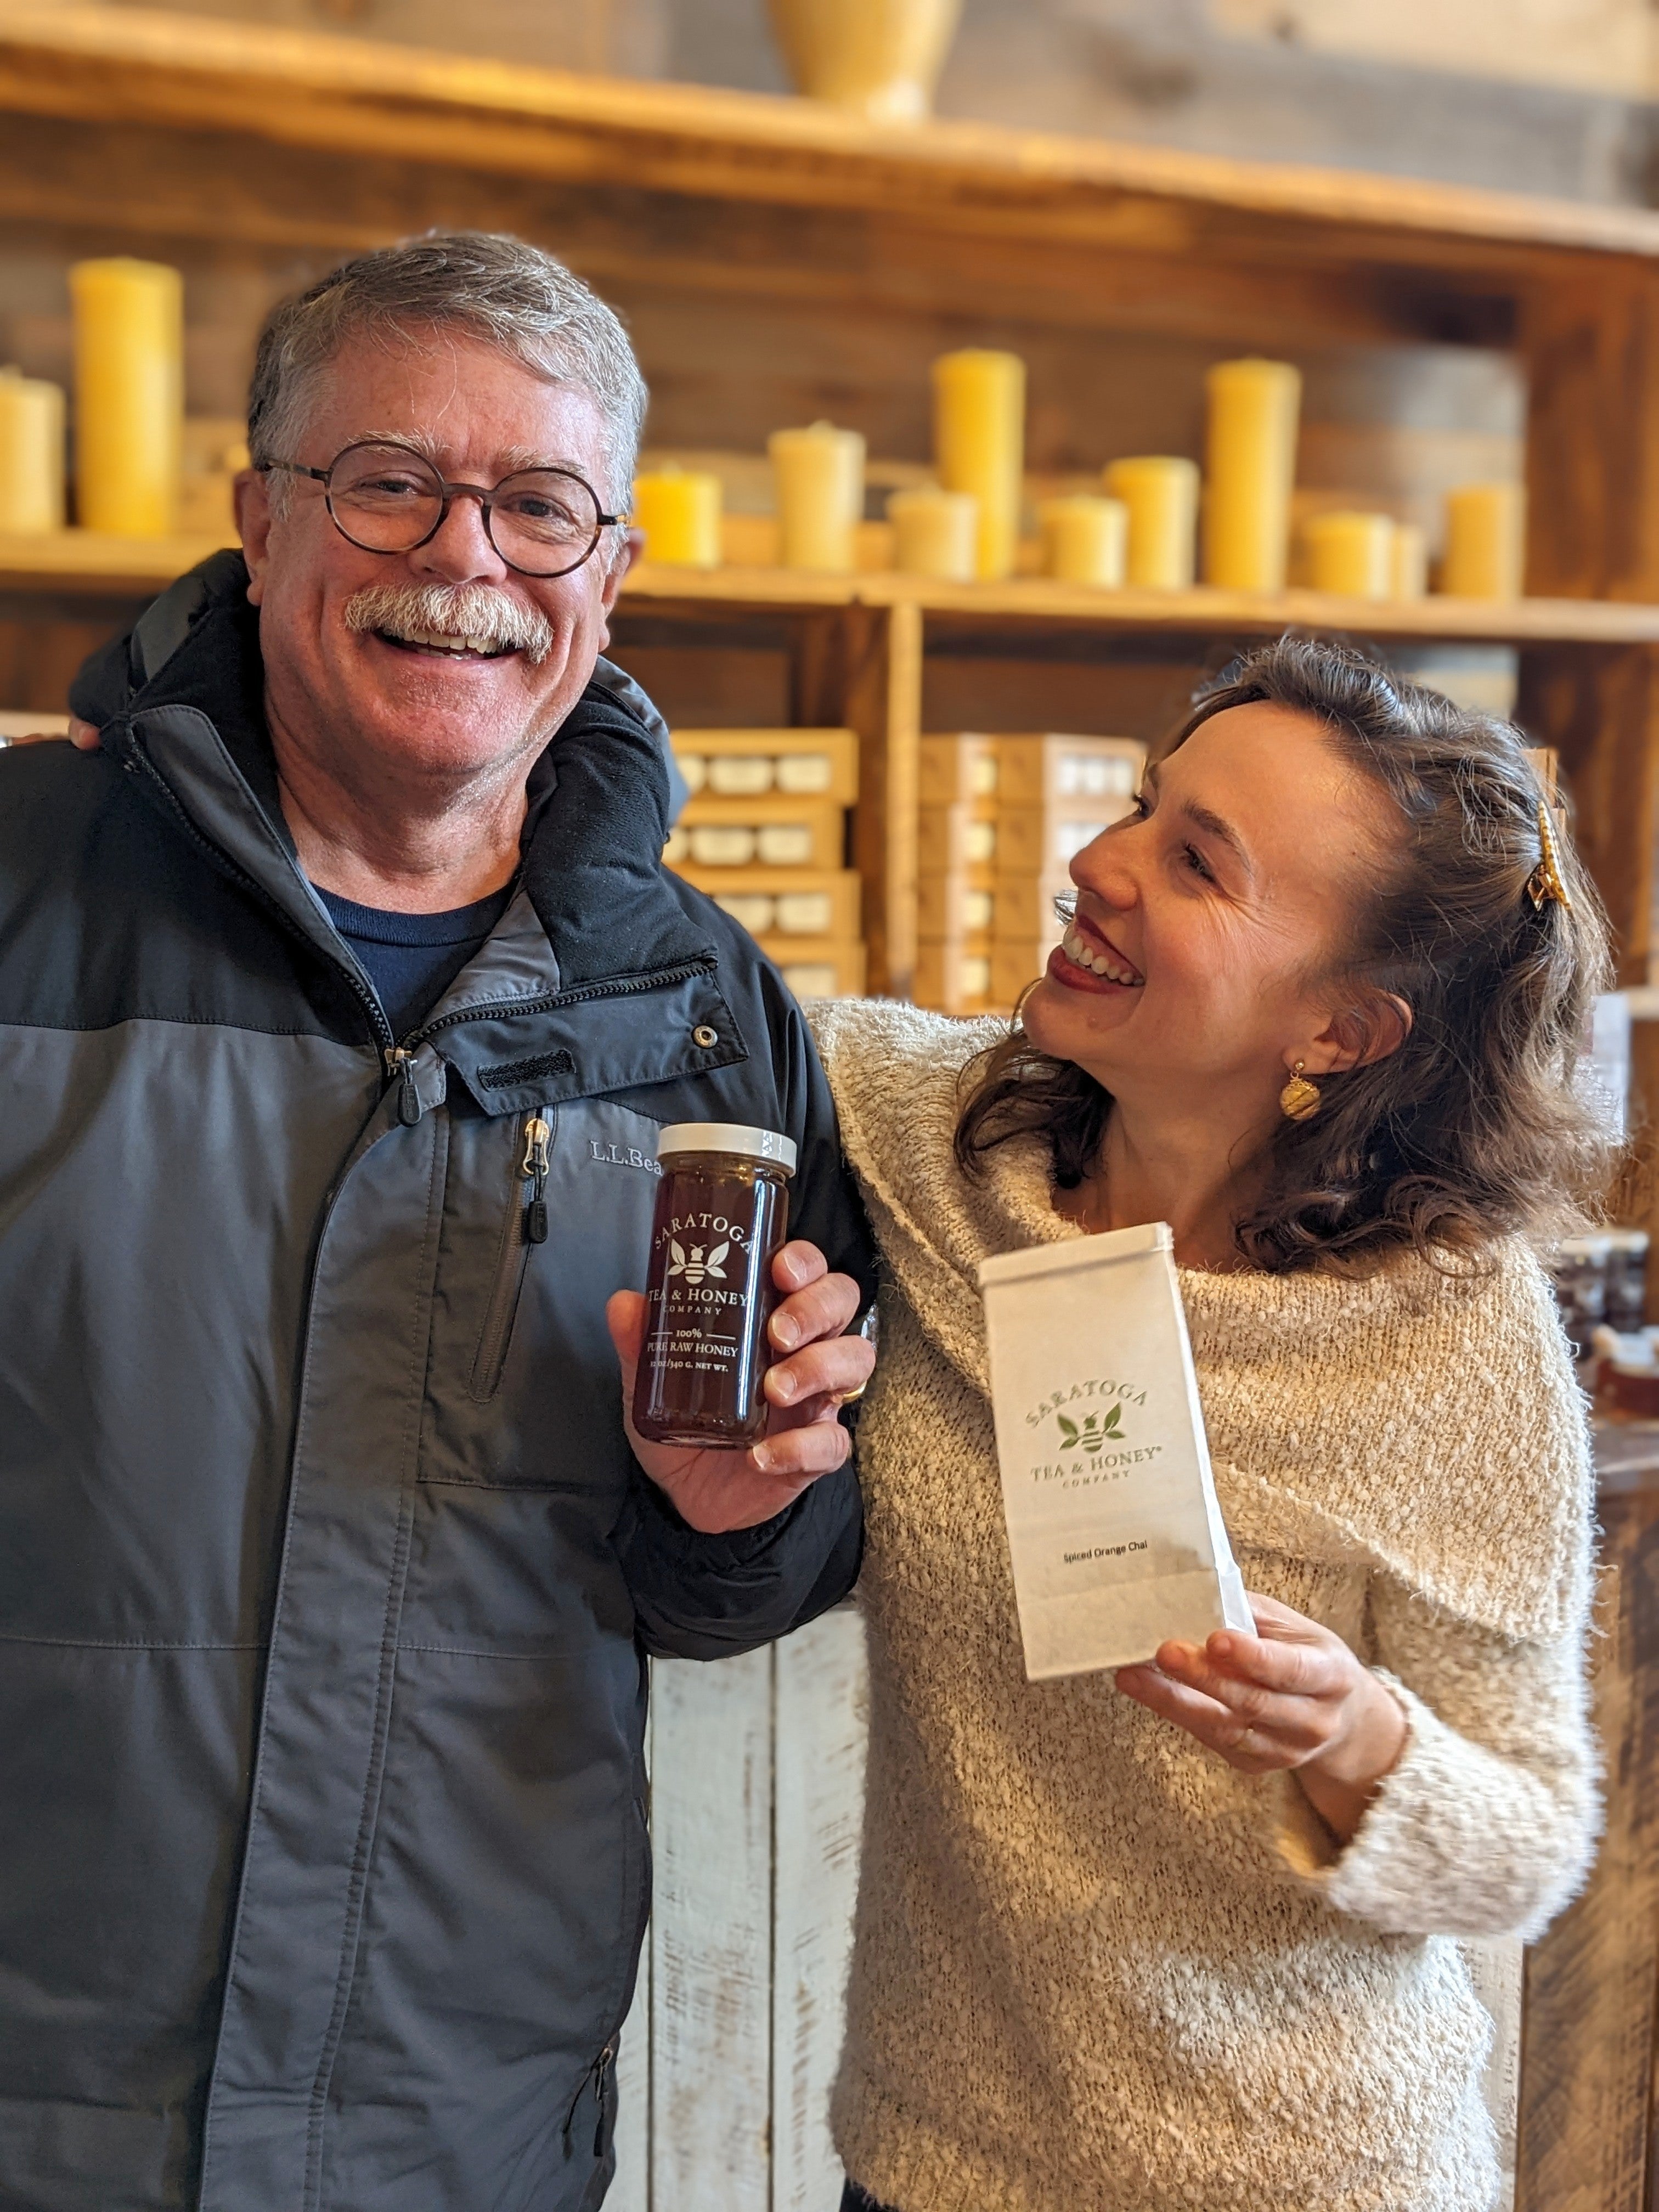 dad and daughter at Saratoga Tea & Honey Co.